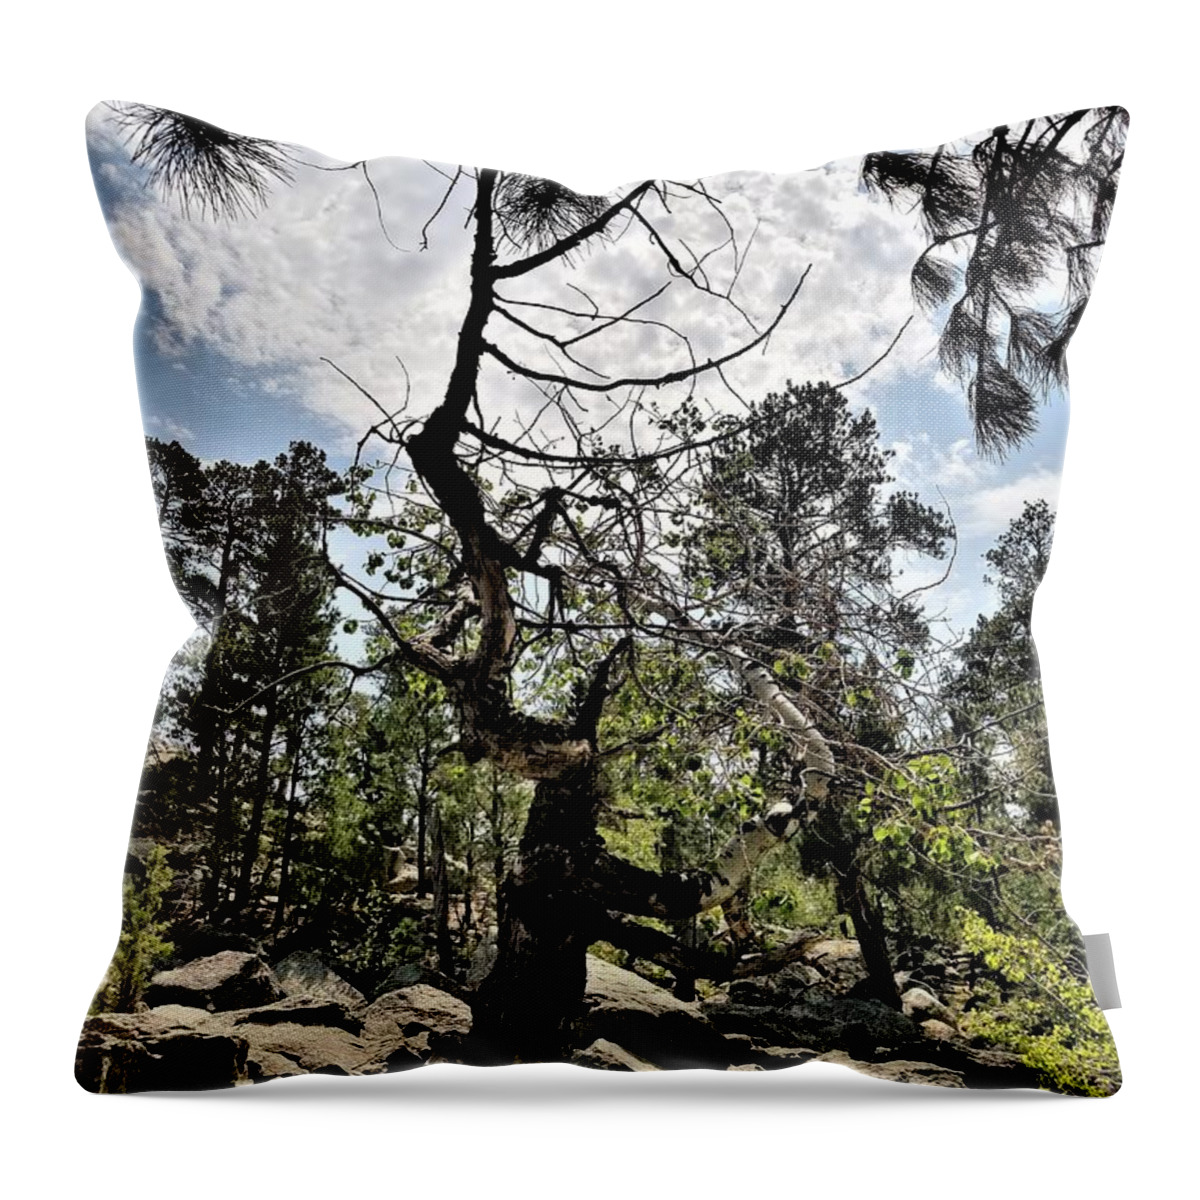 Beautiful Throw Pillow featuring the photograph Devil's Tower Deadwood by Rob Hans